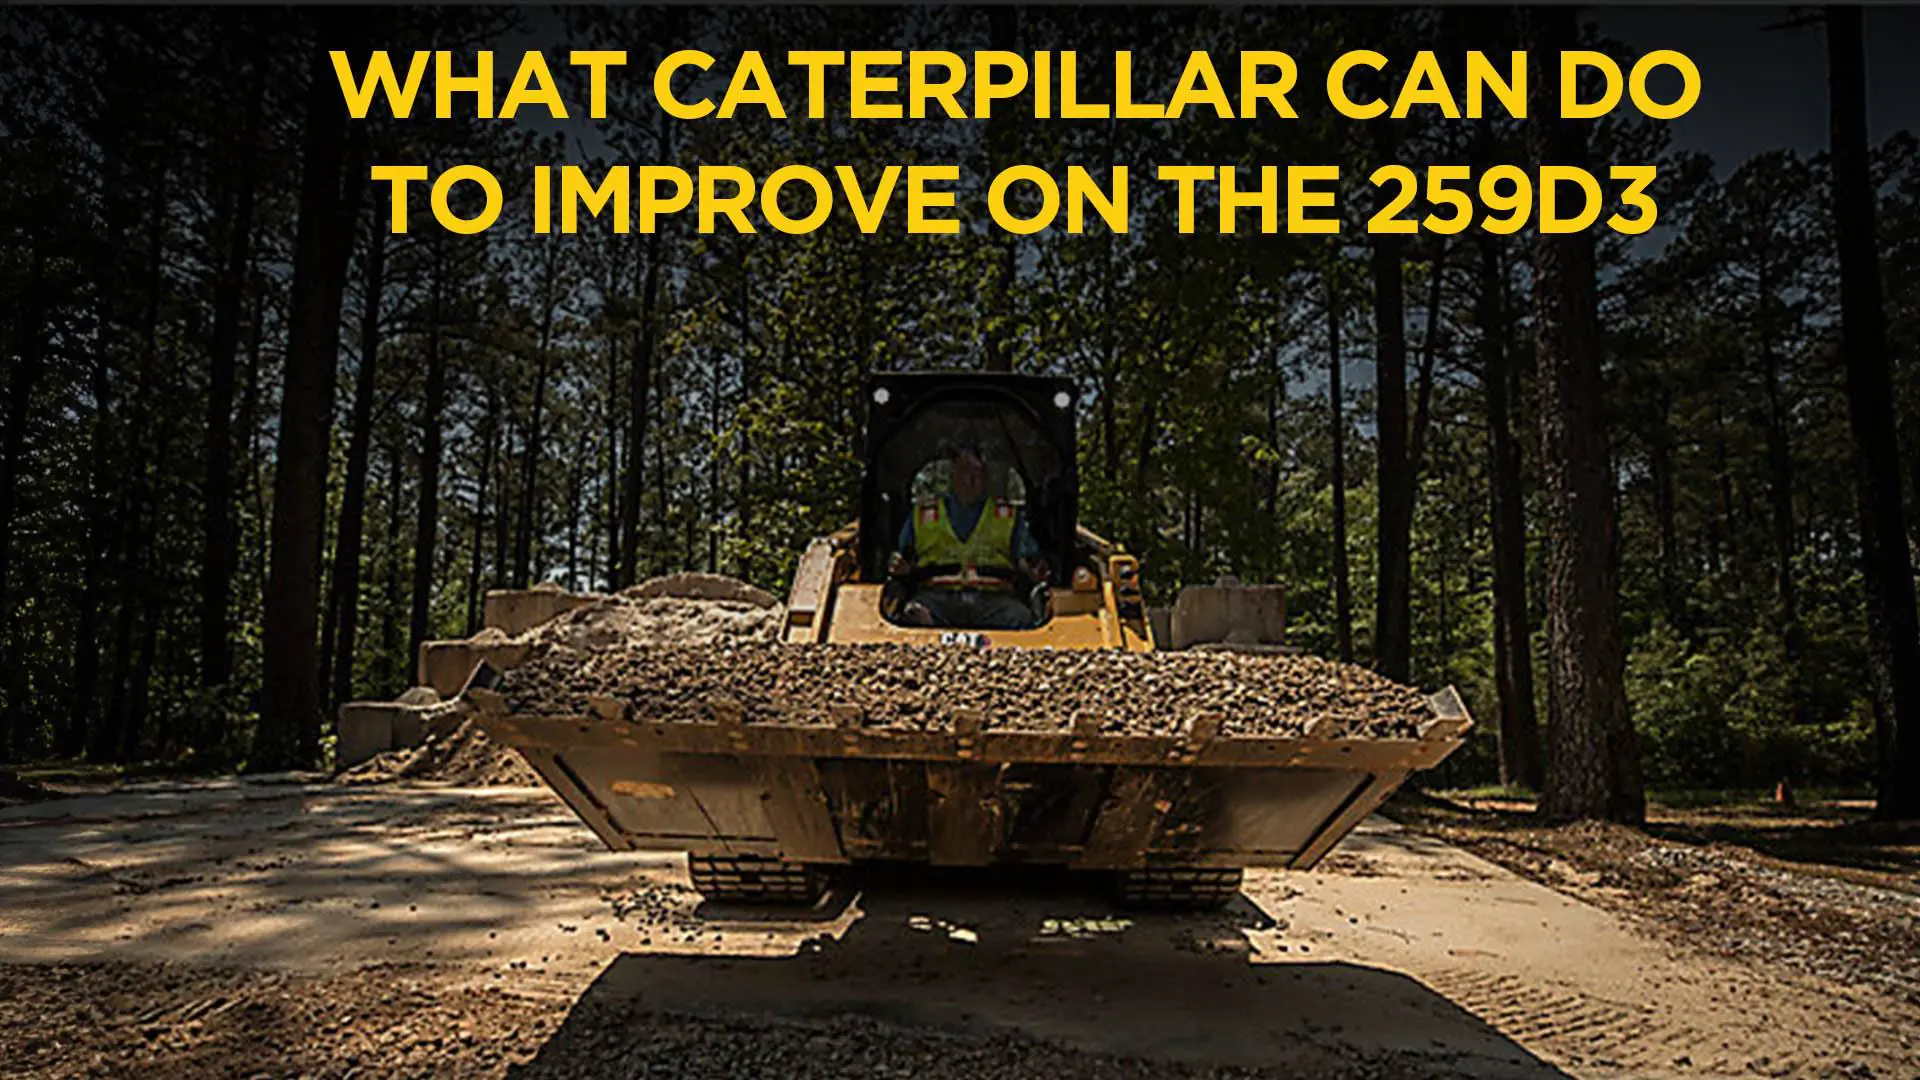 A heavy equipment operator hauls gravel with a Cat 259D3.